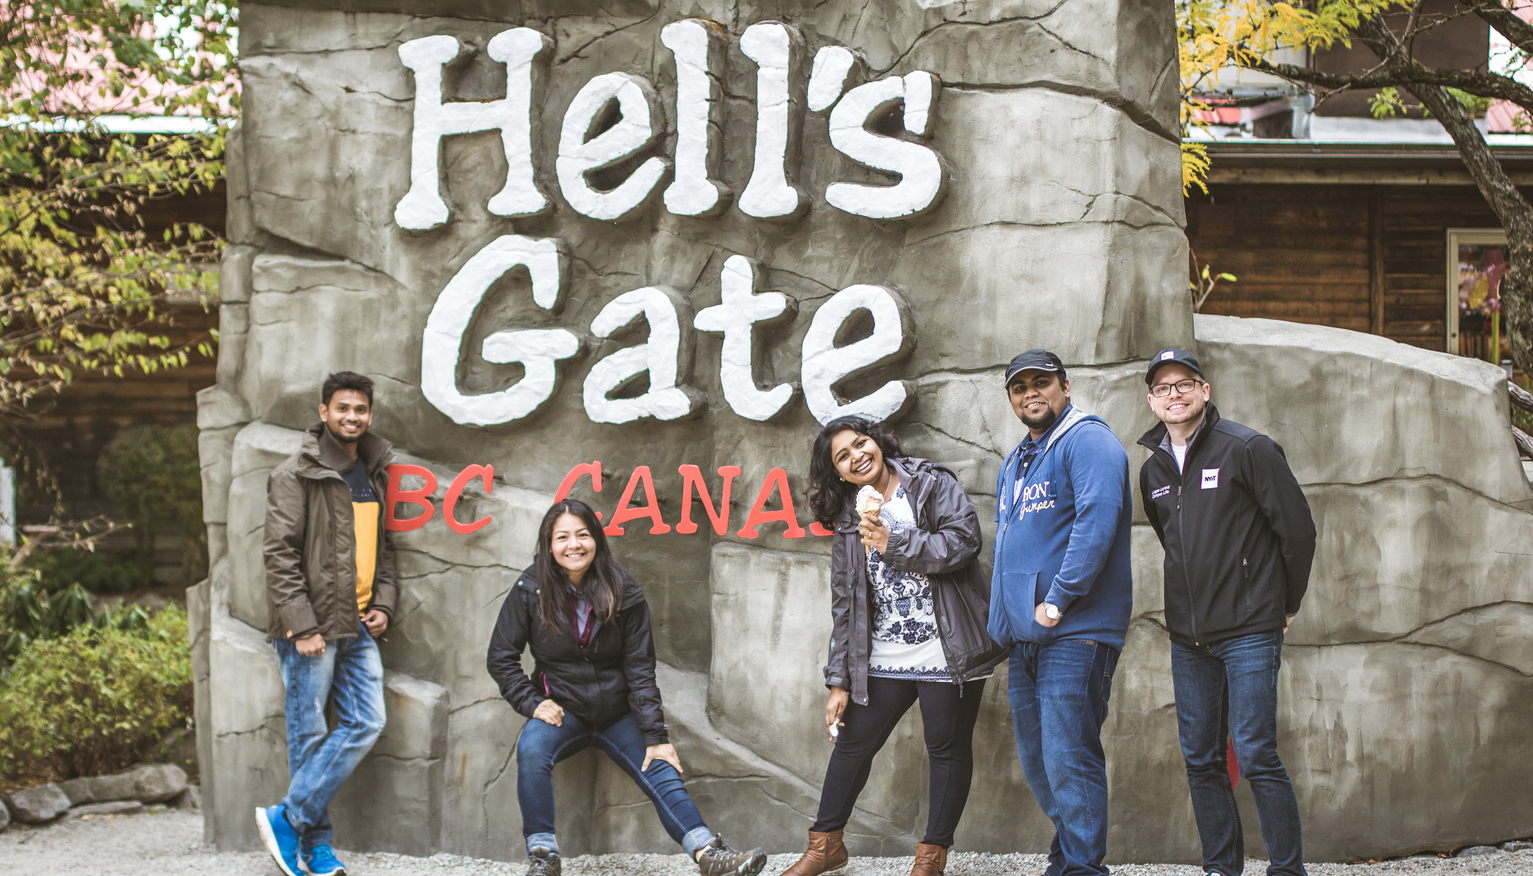 We posed in front of a sign welcoming us to the Hell’s Gate Airtram in British Columbia.